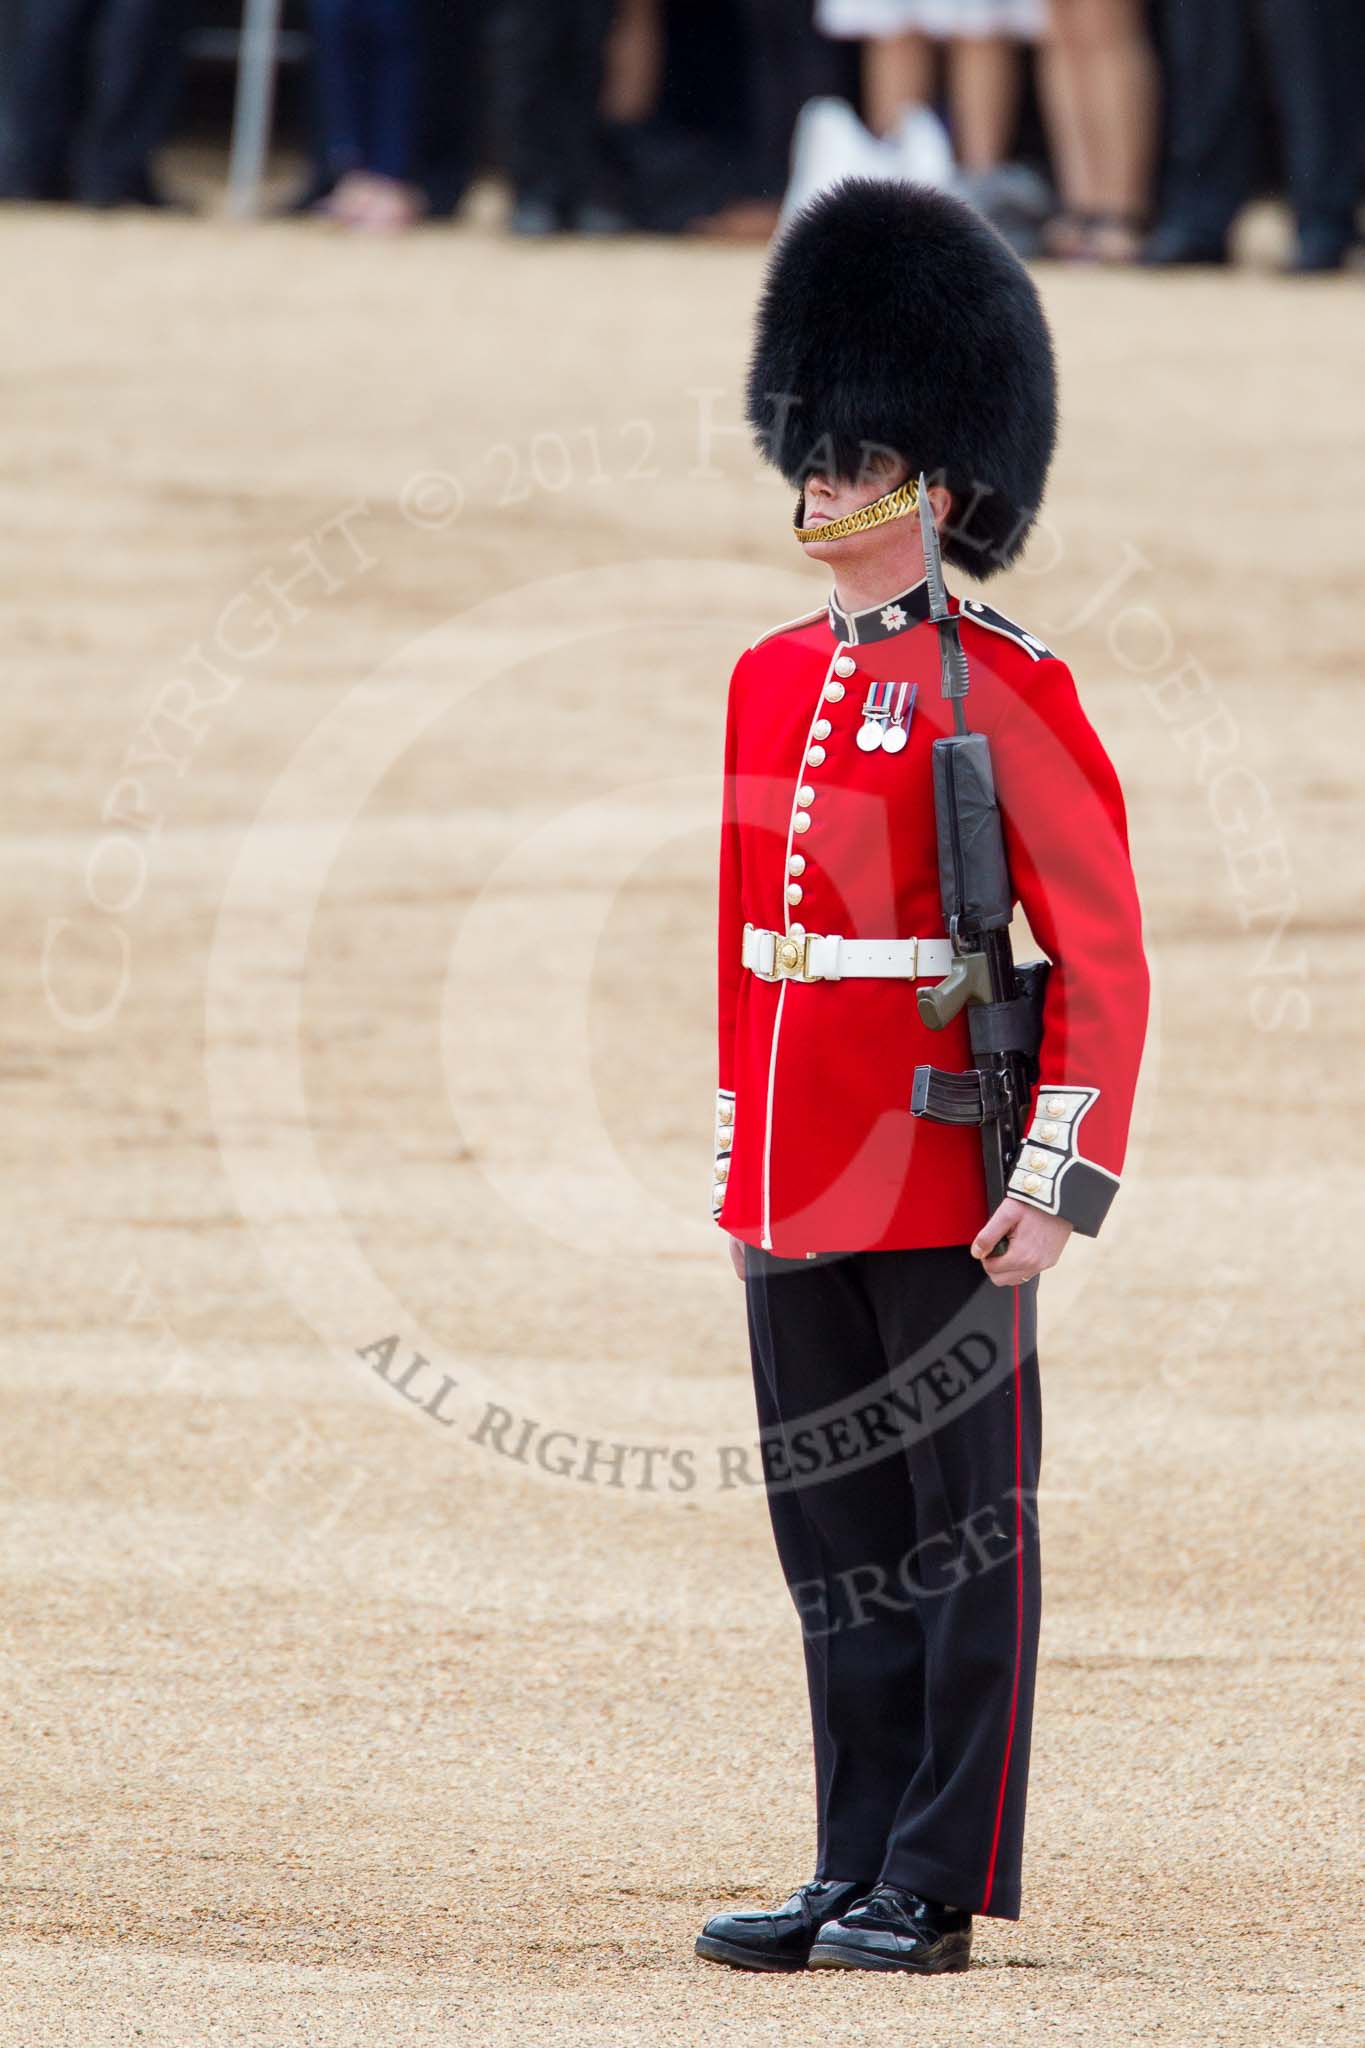 Trooping the Colour 2012: The Sentry on the Southern side of the Colour Sergeant Paul Baines, Guardsman Etherington..
Horse Guards Parade, Westminster,
London SW1,

United Kingdom,
on 16 June 2012 at 11:19, image #300